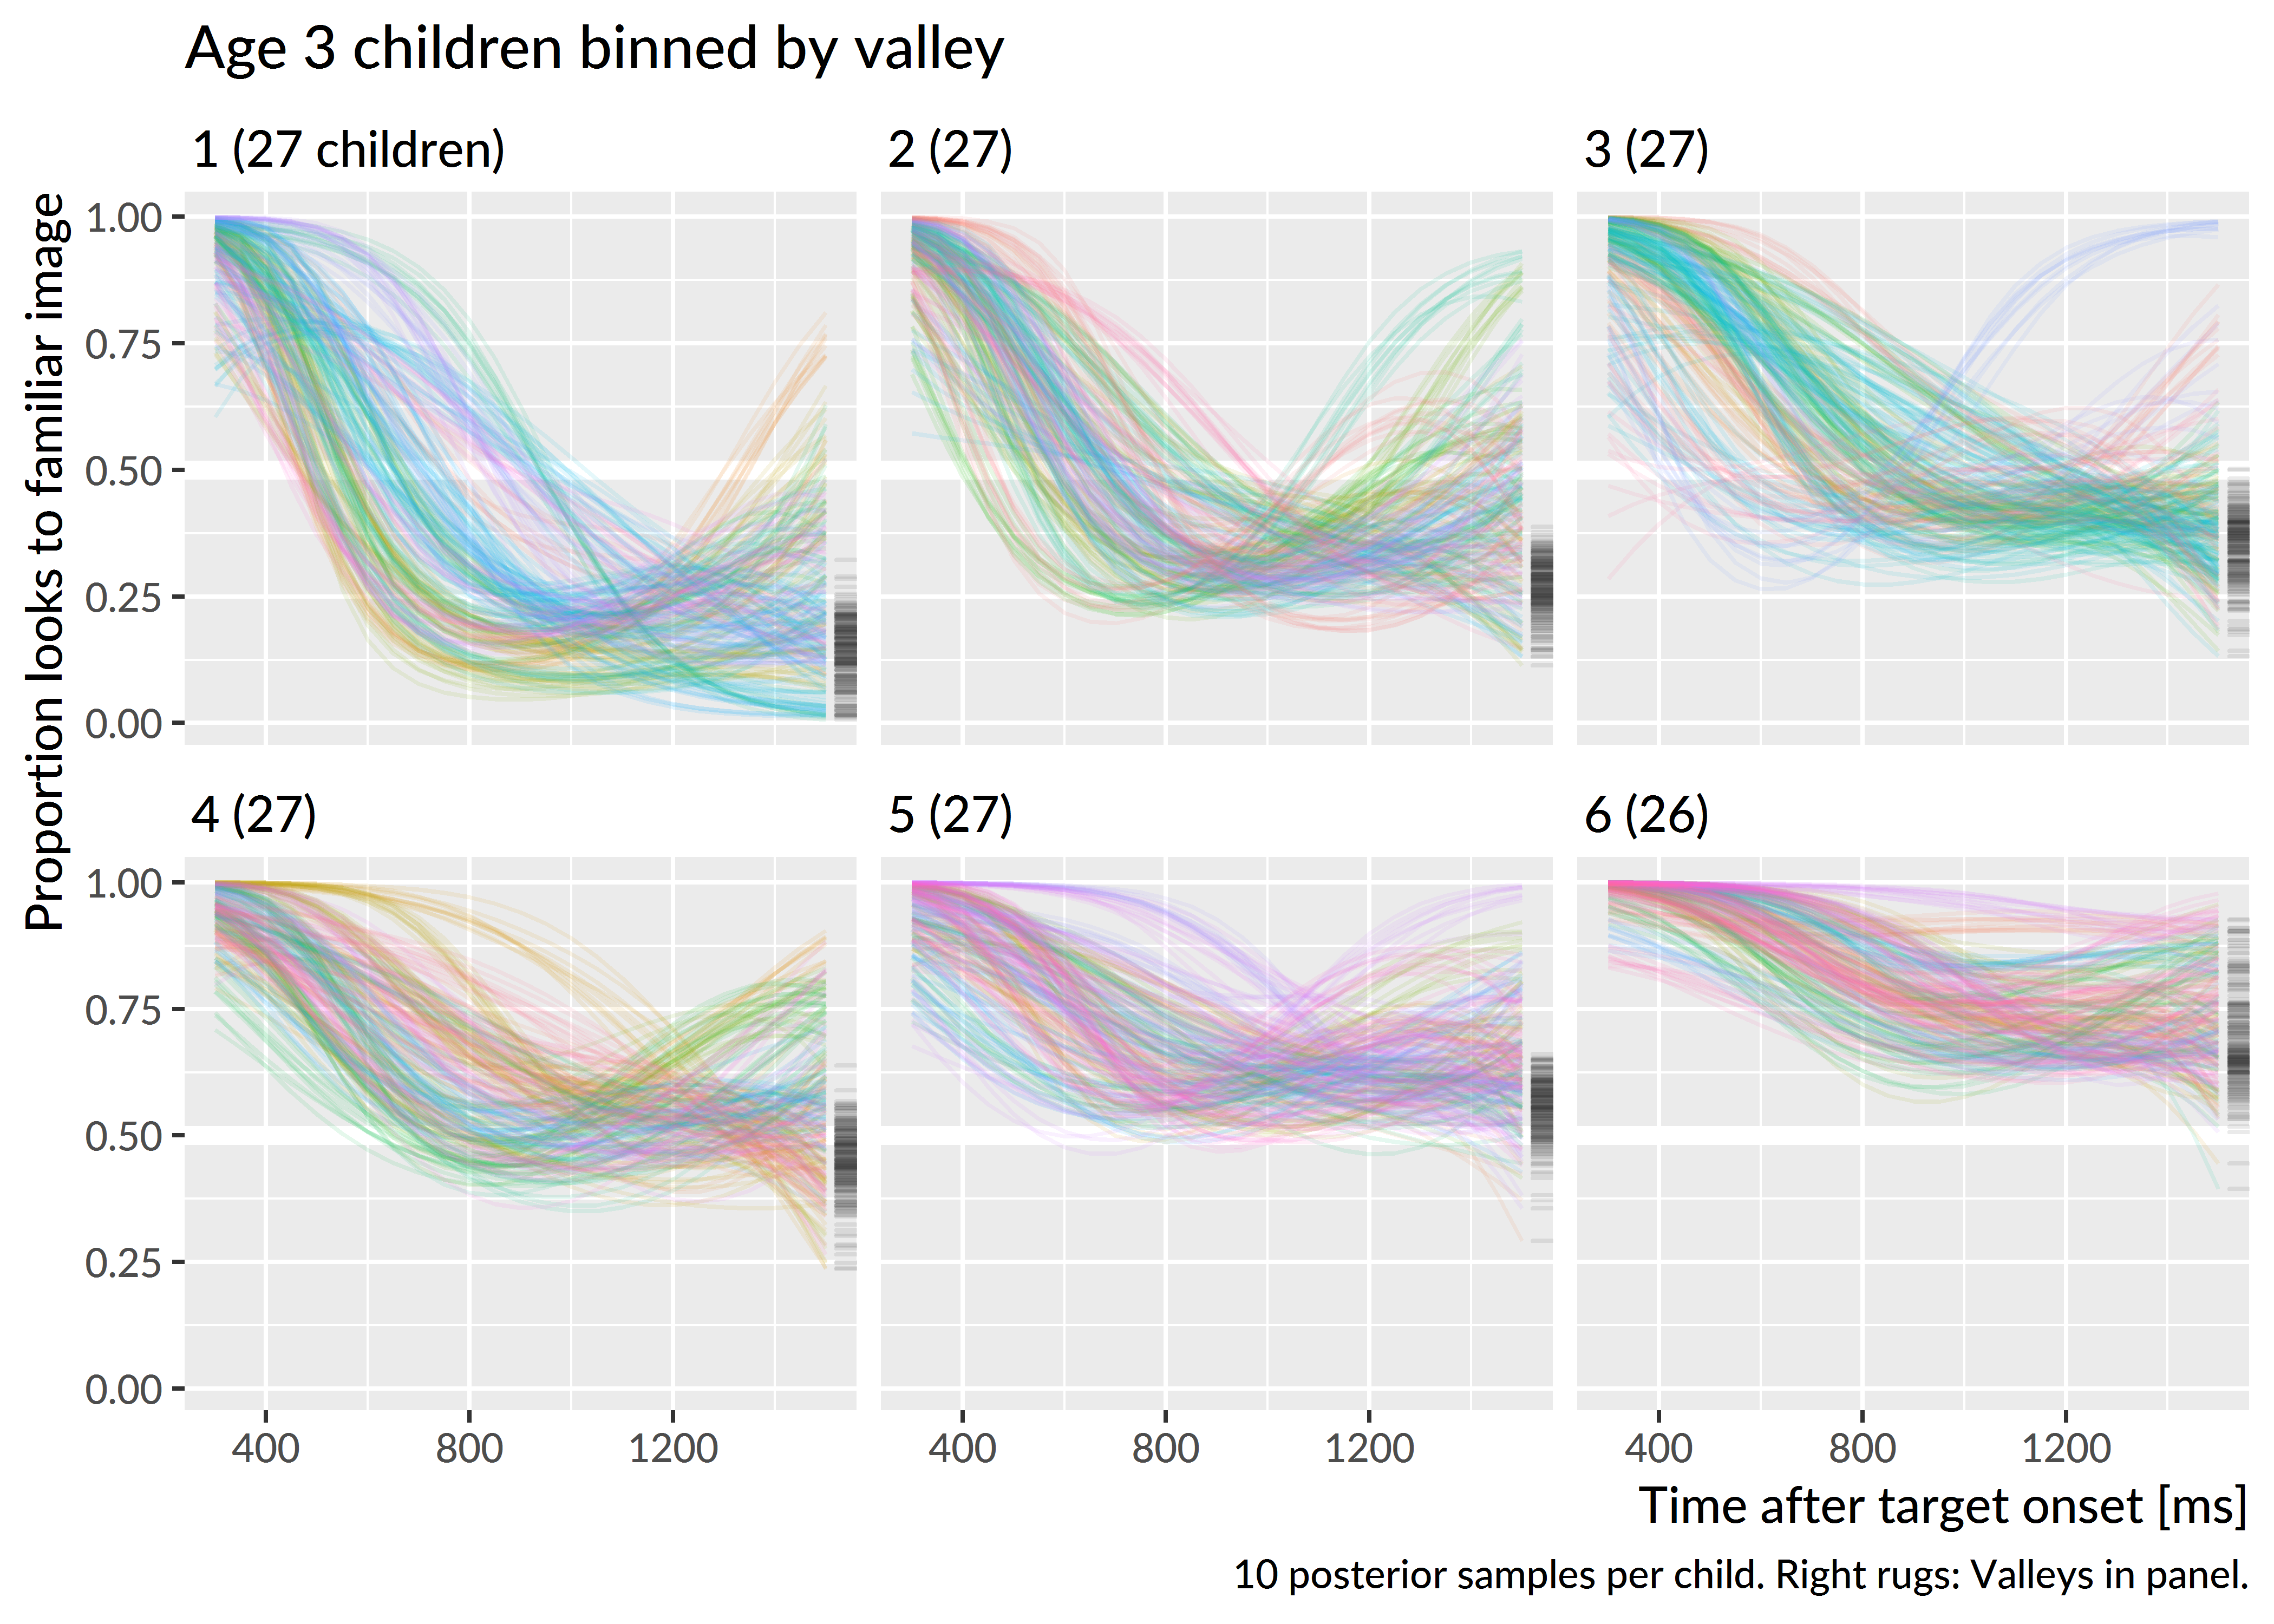 Growth curves for mispronunciation trials starting on the familiar image at age 3. Children were grouped into sextiles based on the posterior mean of their growth curve valleys—that is, the lowest point on the growth curve. Ten lines are drawn per child to visualize uncertainty. Children were assigned colors arbitrarily. On the right side of each panel are “rugs” which mark the valleys in that panel.